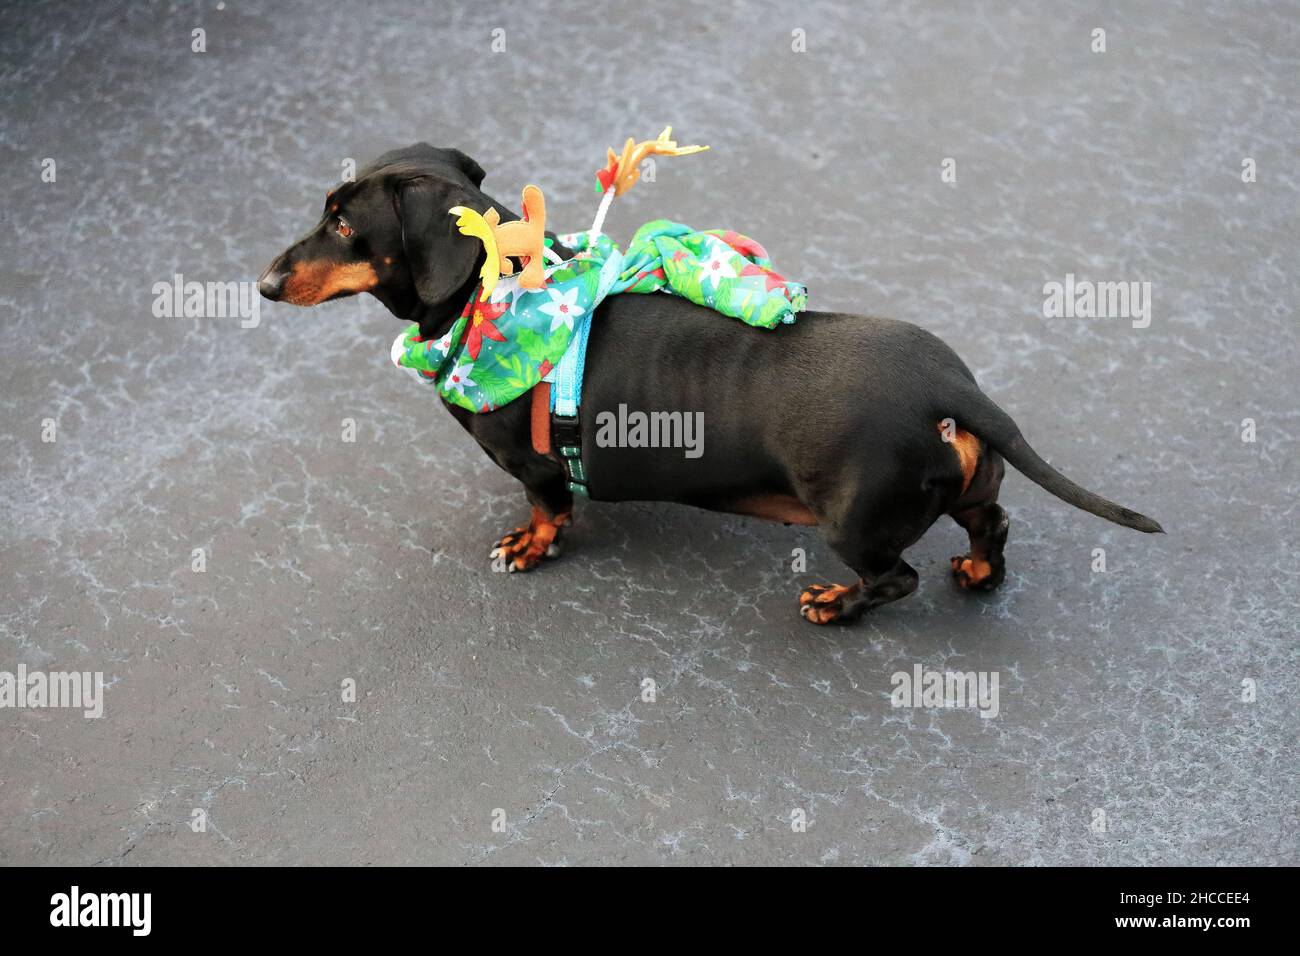 Dachshund in holiday outfit Stock Photo